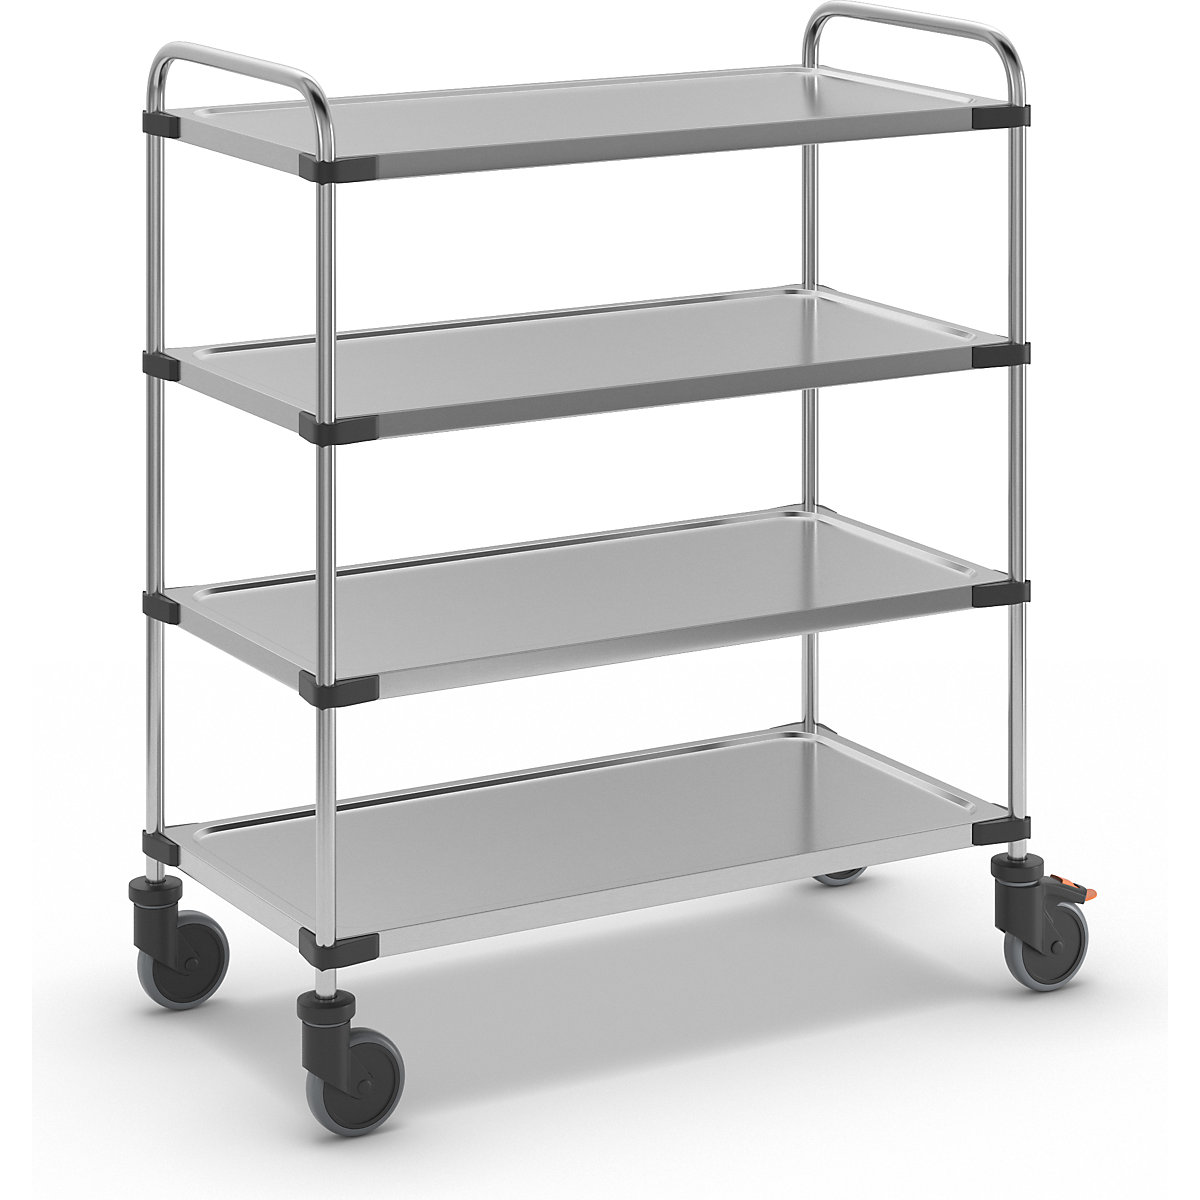 Stainless steel table trolley, with 4 shelves, LxWxH 1070 x 570 x 1260 mm, assembled-1